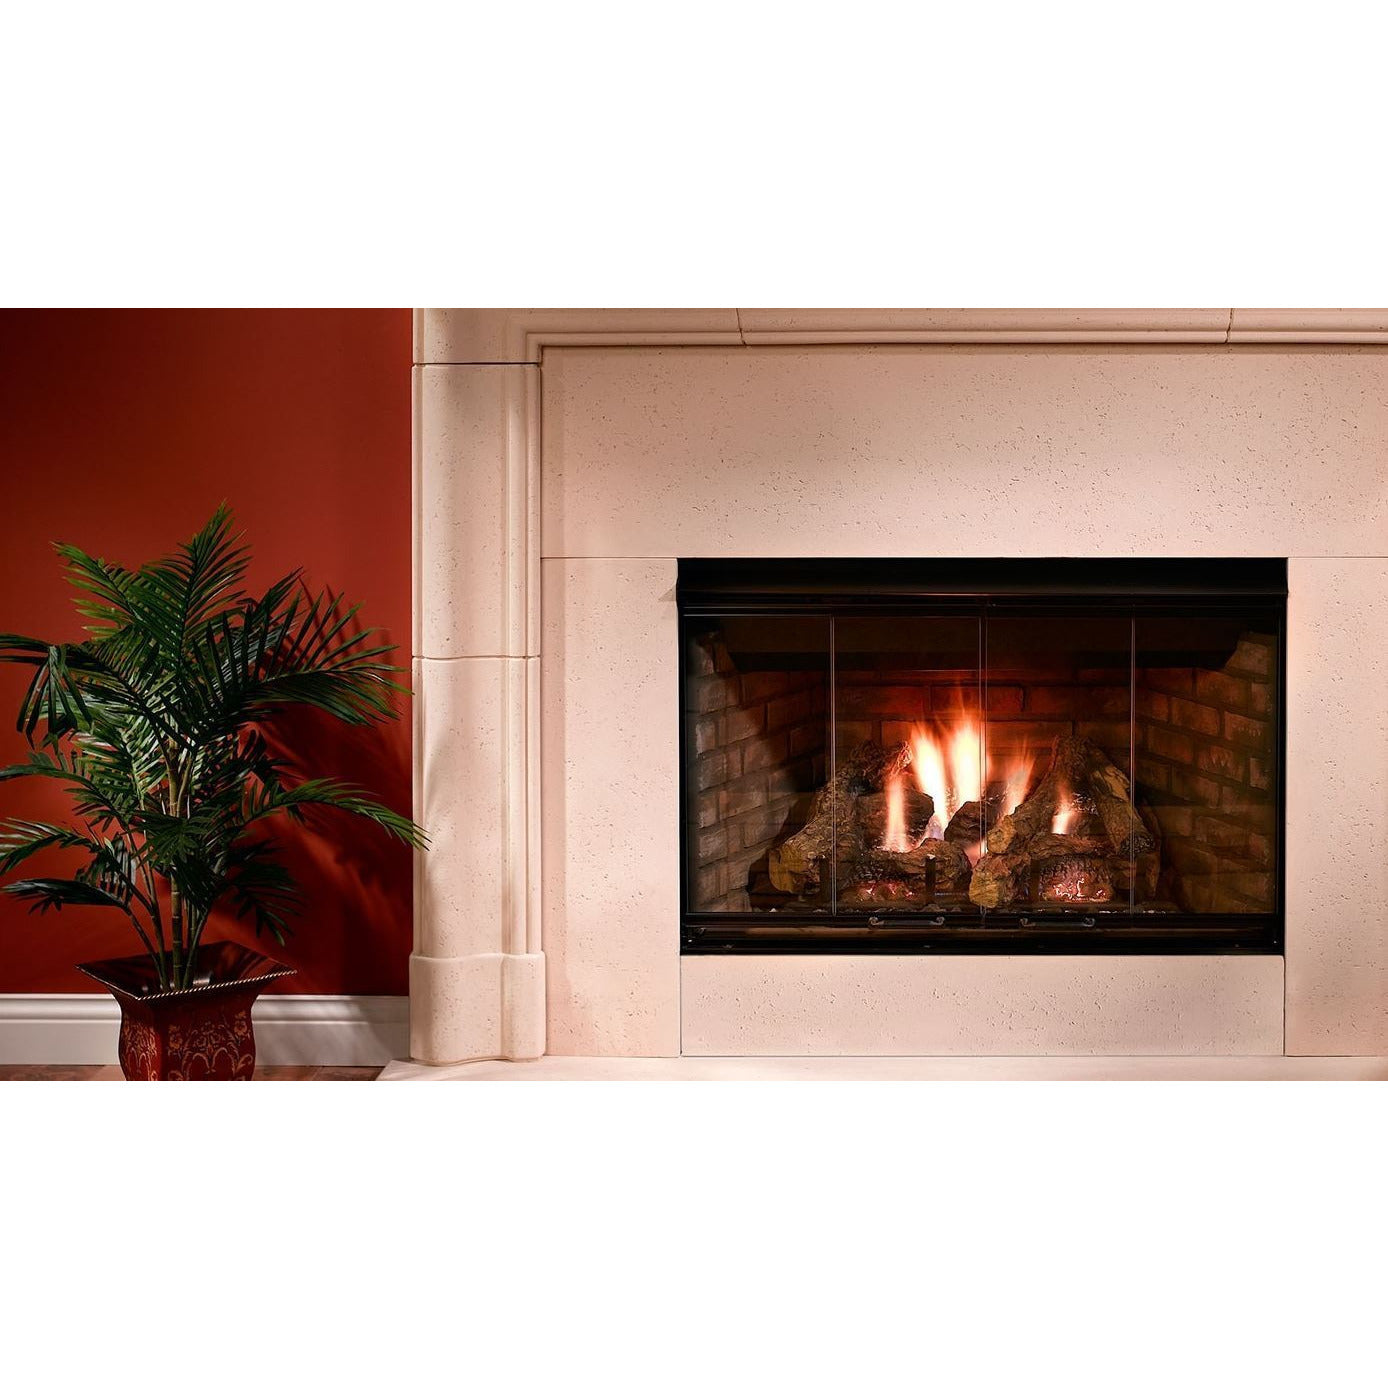 Majestic Reveal 42" Open Hearth Gas Fireplace with IntelliFire RBV4842IT